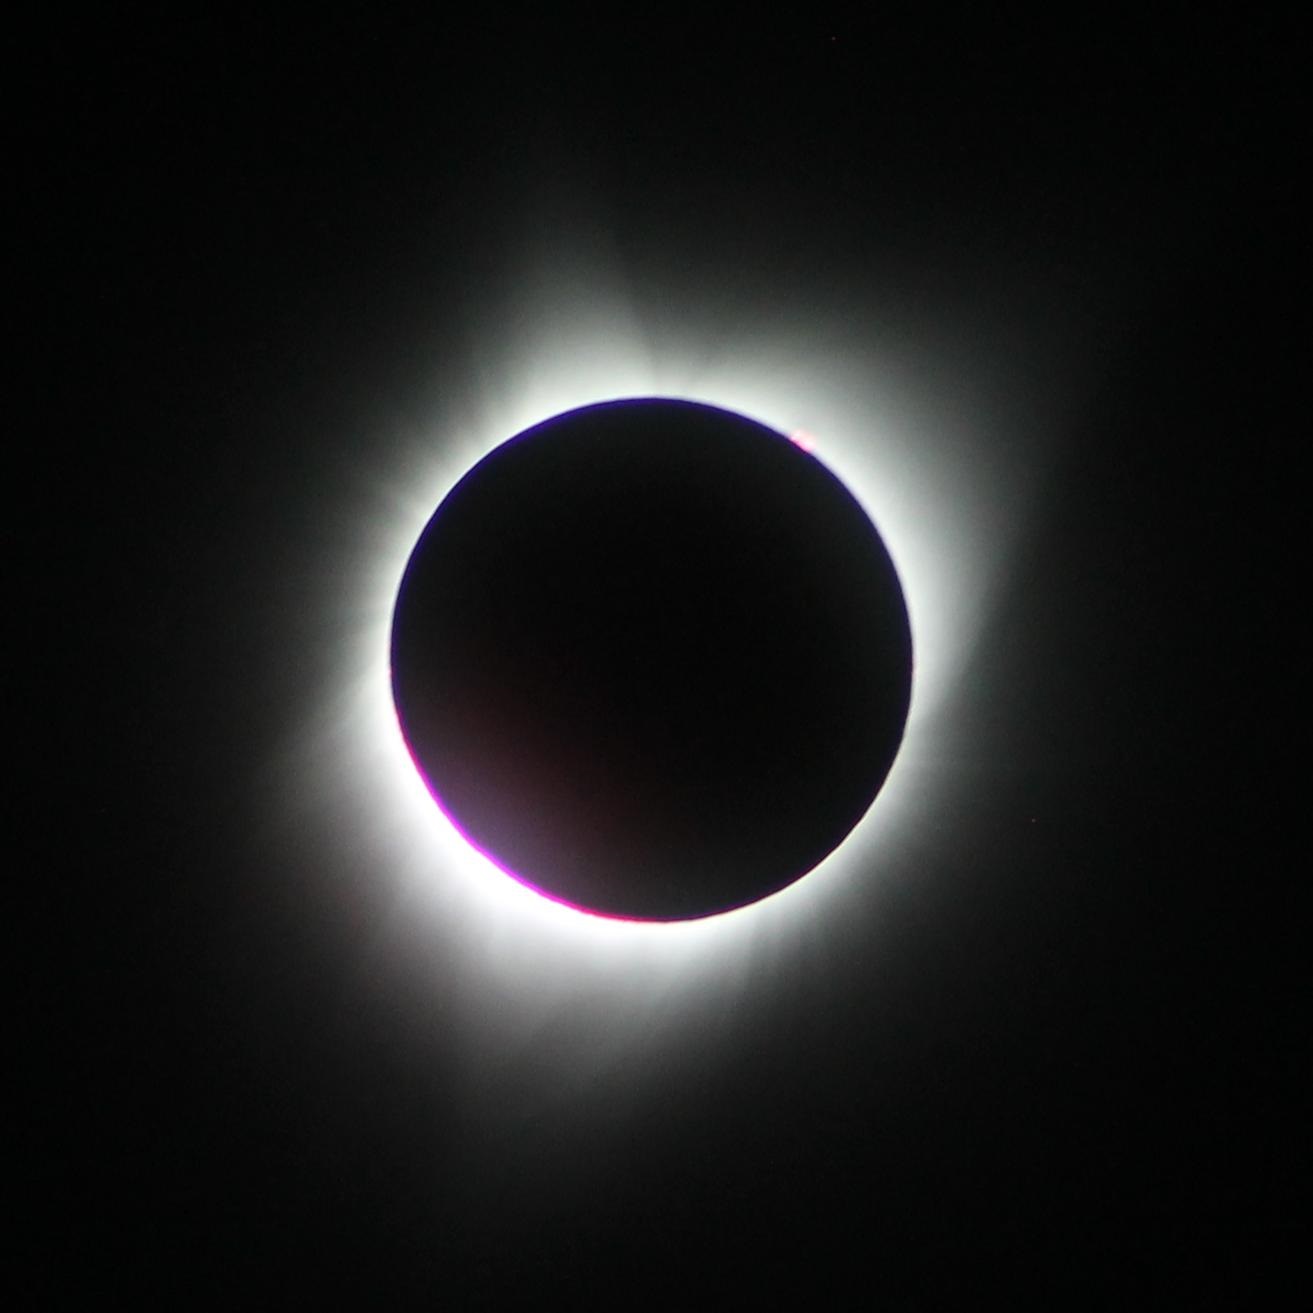 http://capnbob.us/blog/wp-content/uploads/2017/09/early-totality.jpg